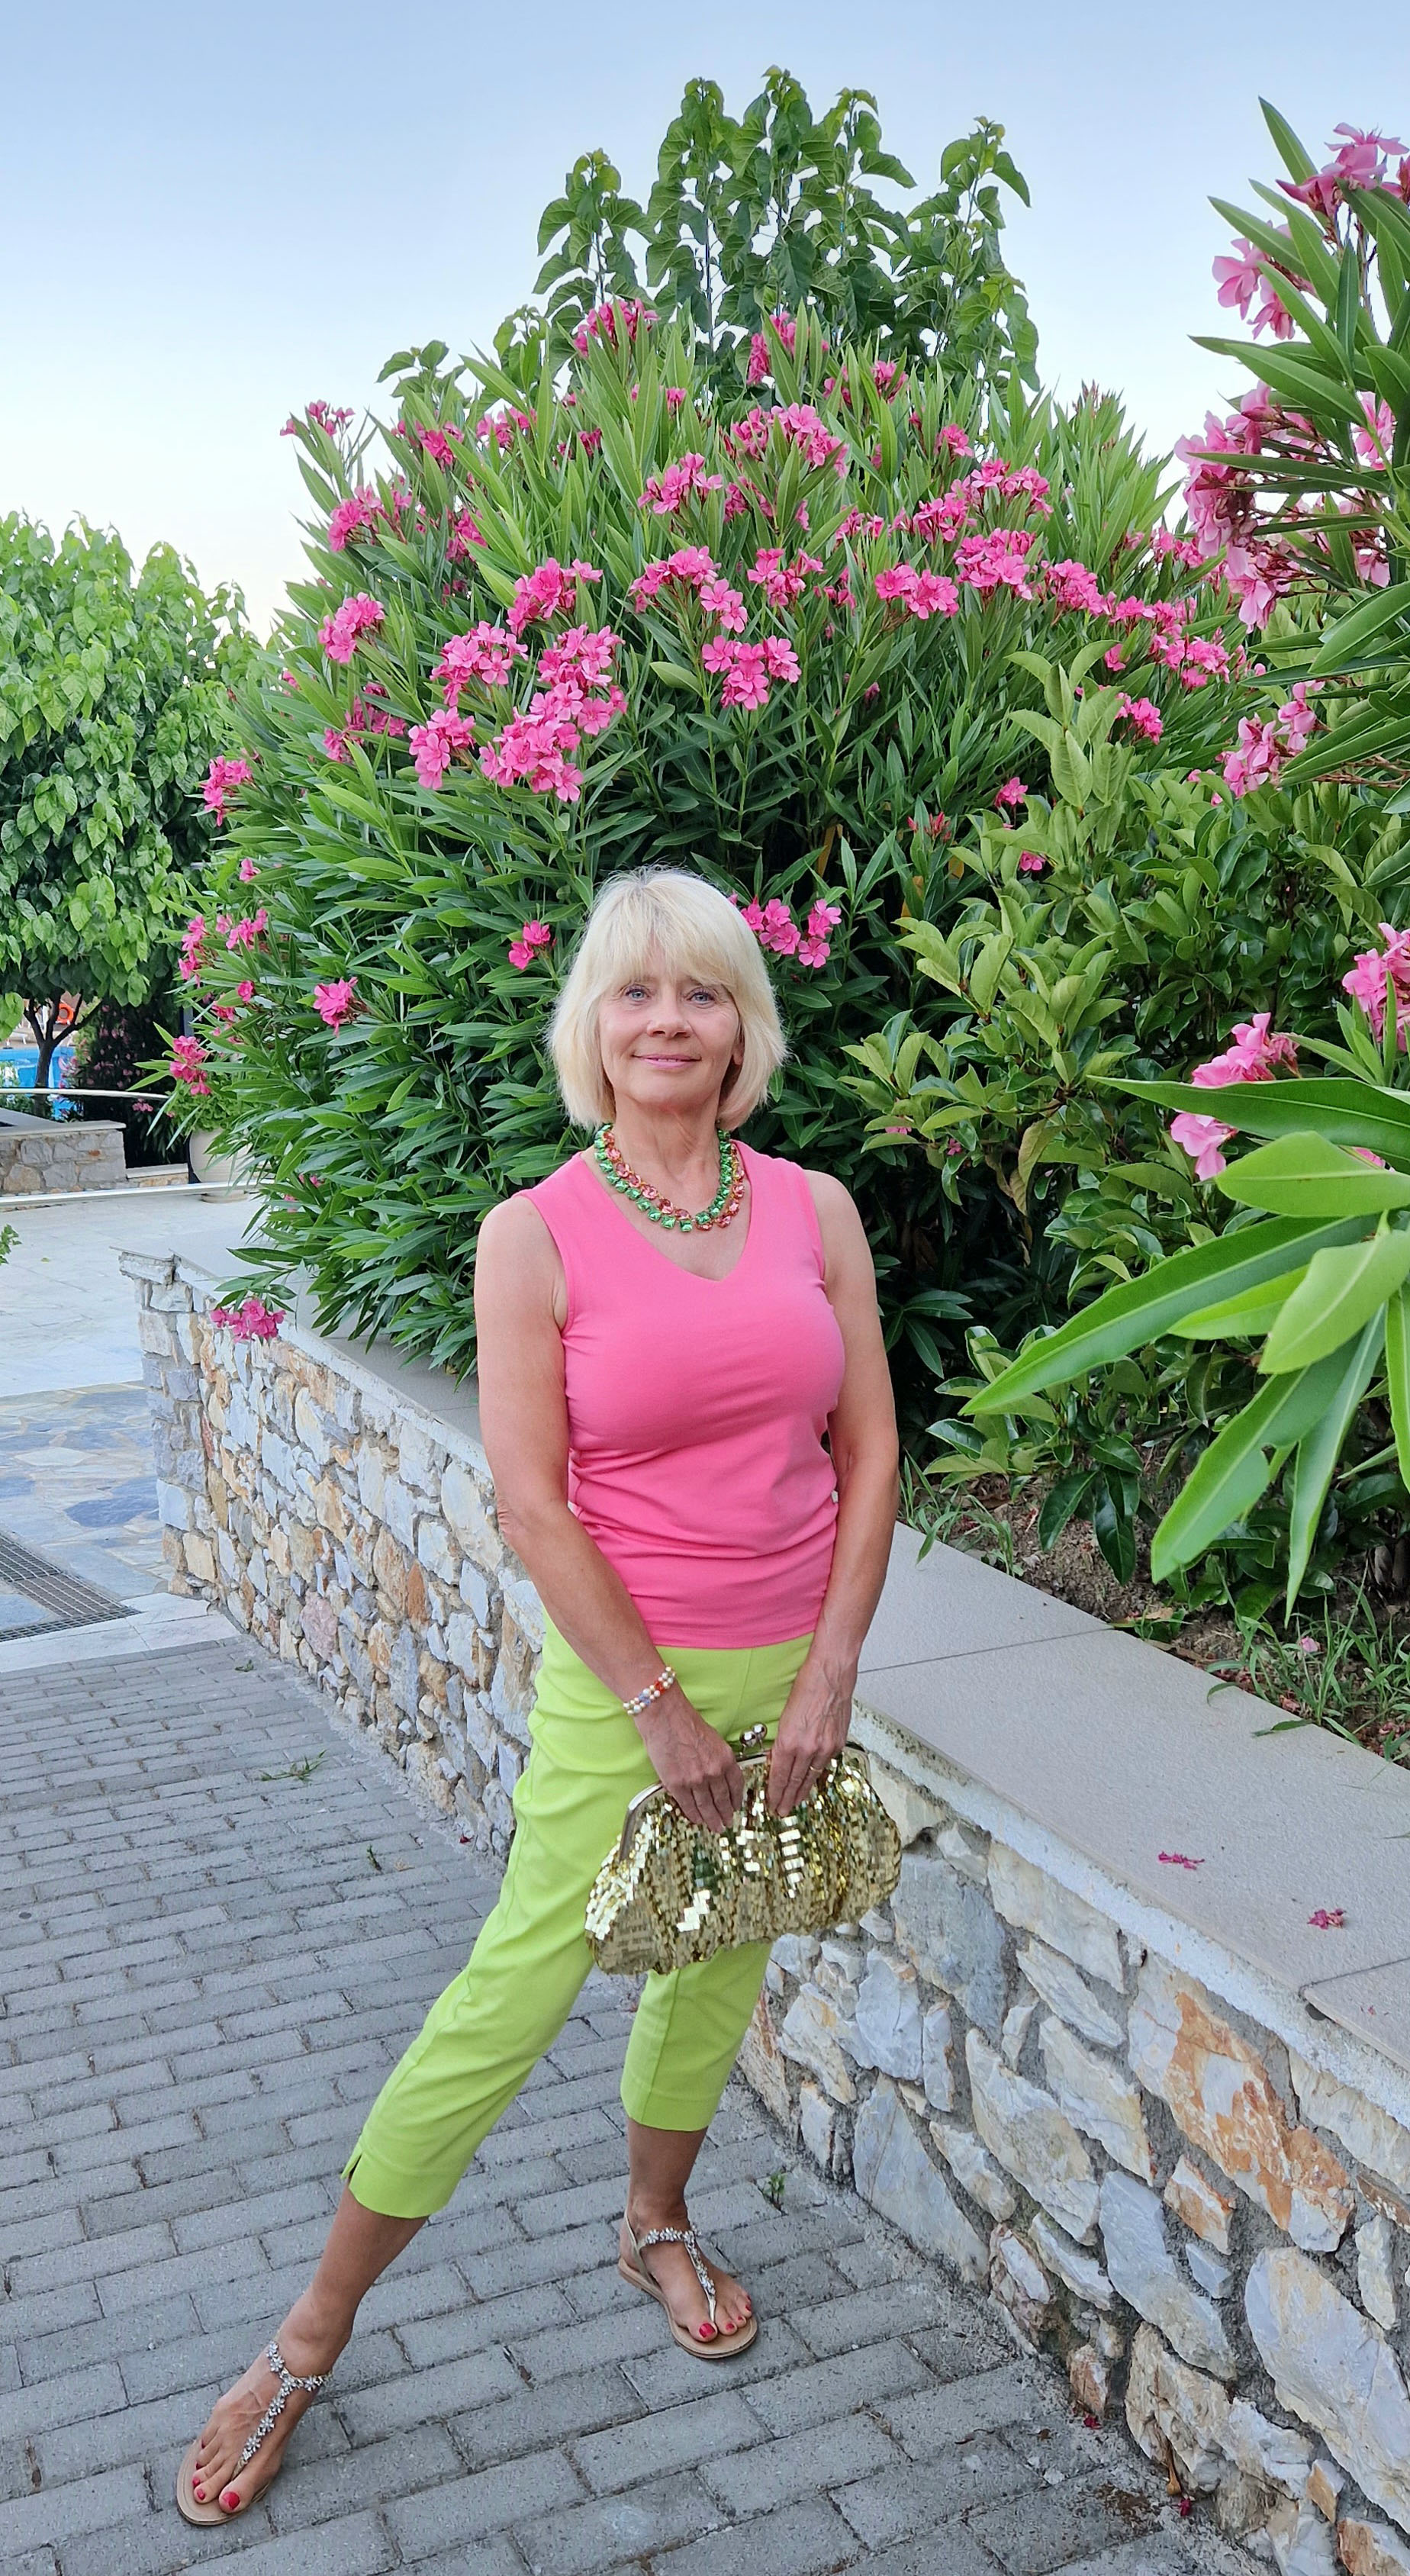 Gail Hanlon in pink and lime green for the July Style Not Age Challenge of Summer Sizzlers photographed on the Greek island of Skiathos.